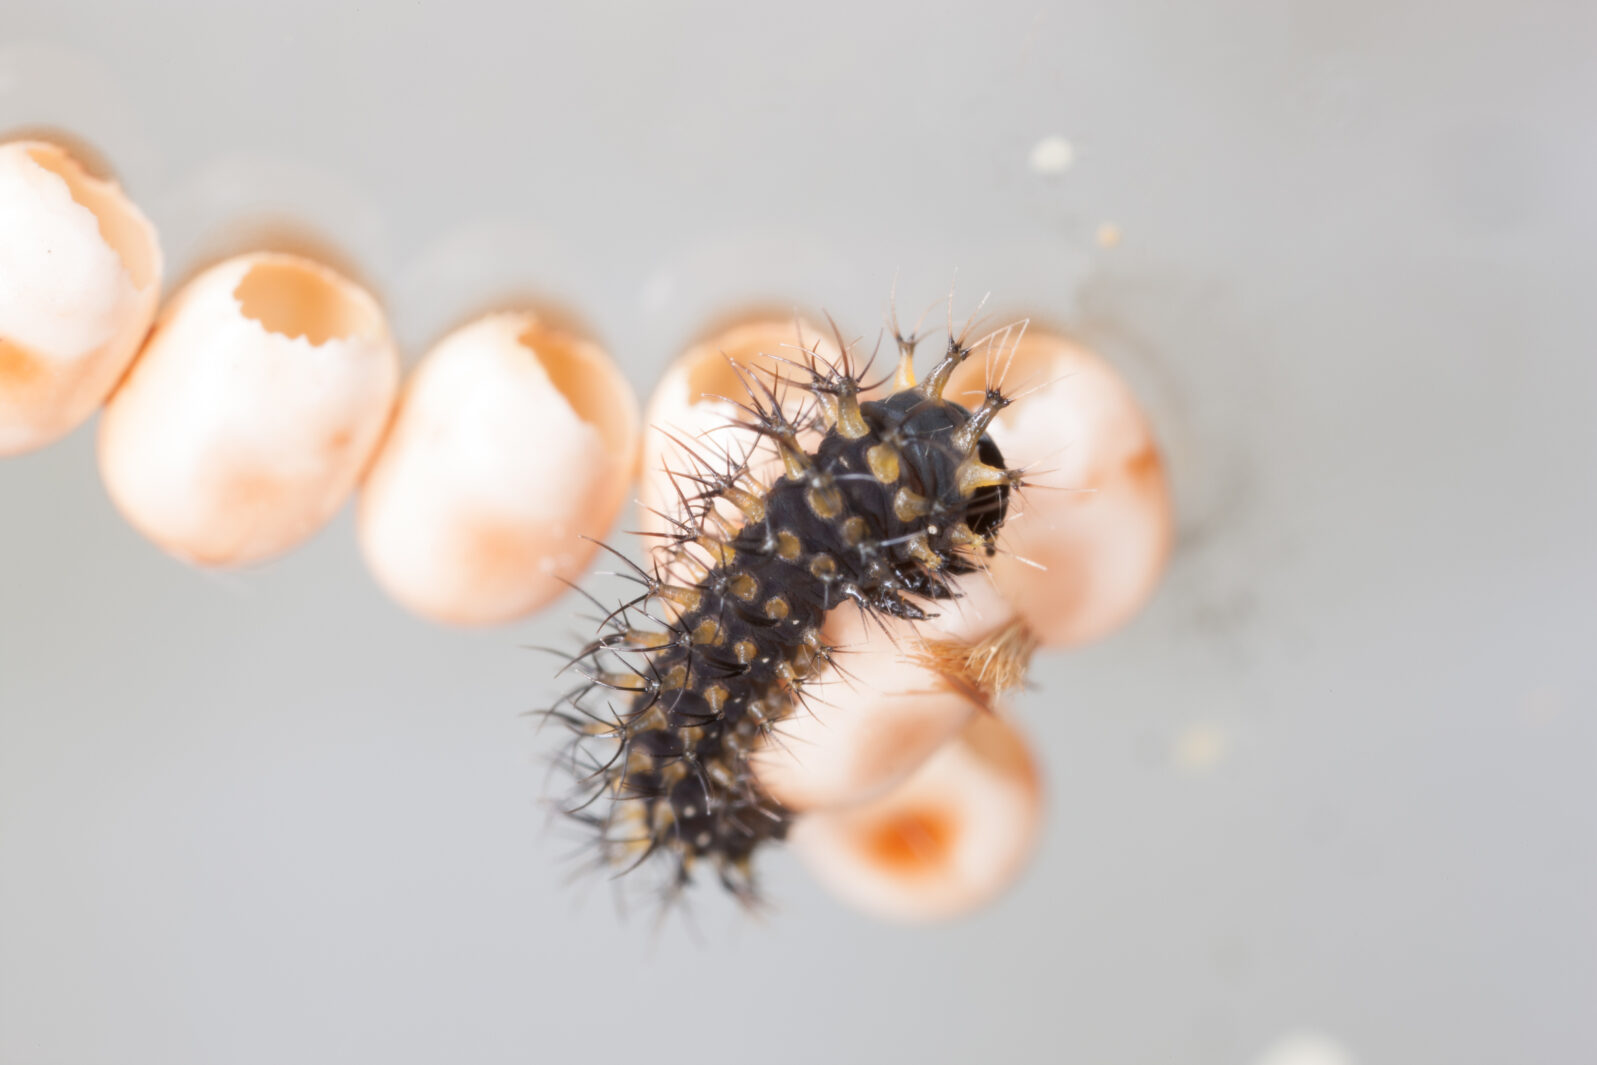 Cecropia Moth caterpillar, first instar, just hatched from egg, 5x lifesize